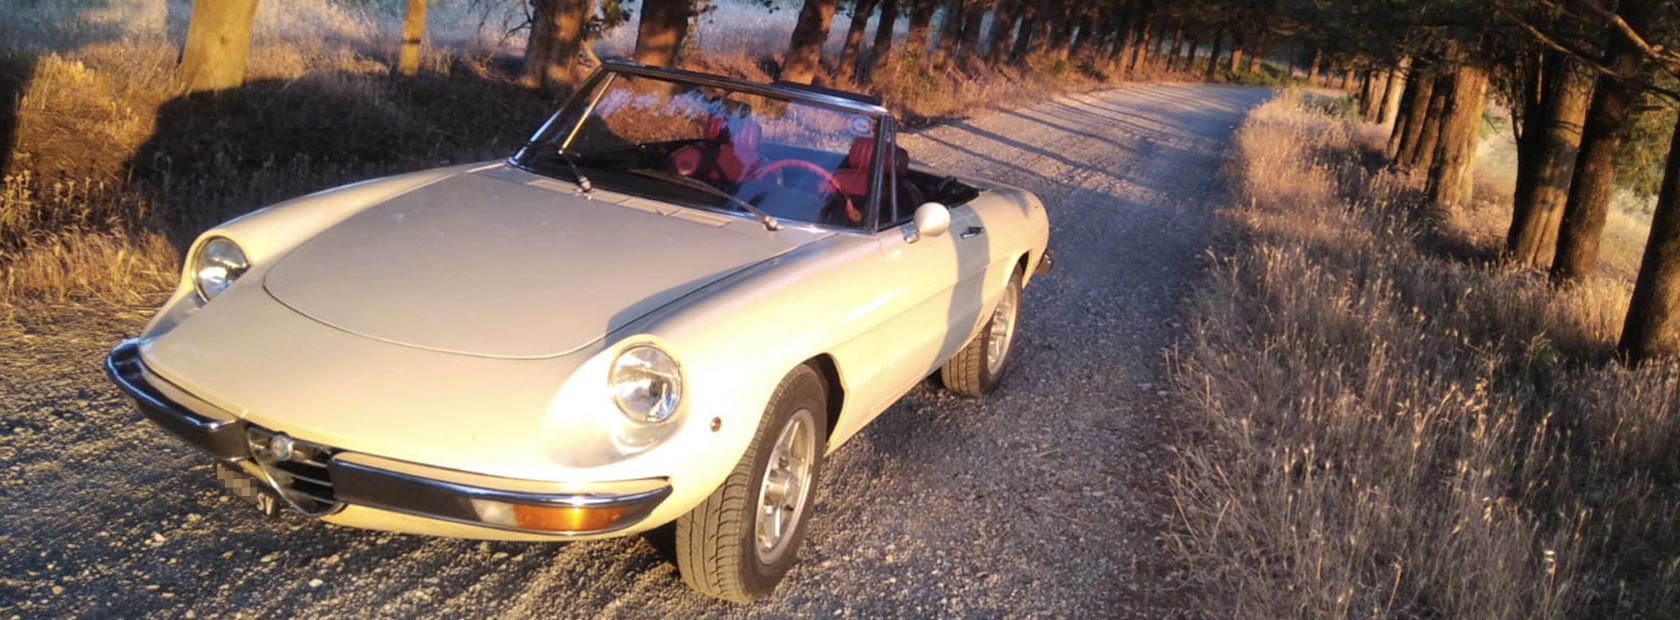 White Duetto for rent: classic car for weddings in Tuscany and Umbria